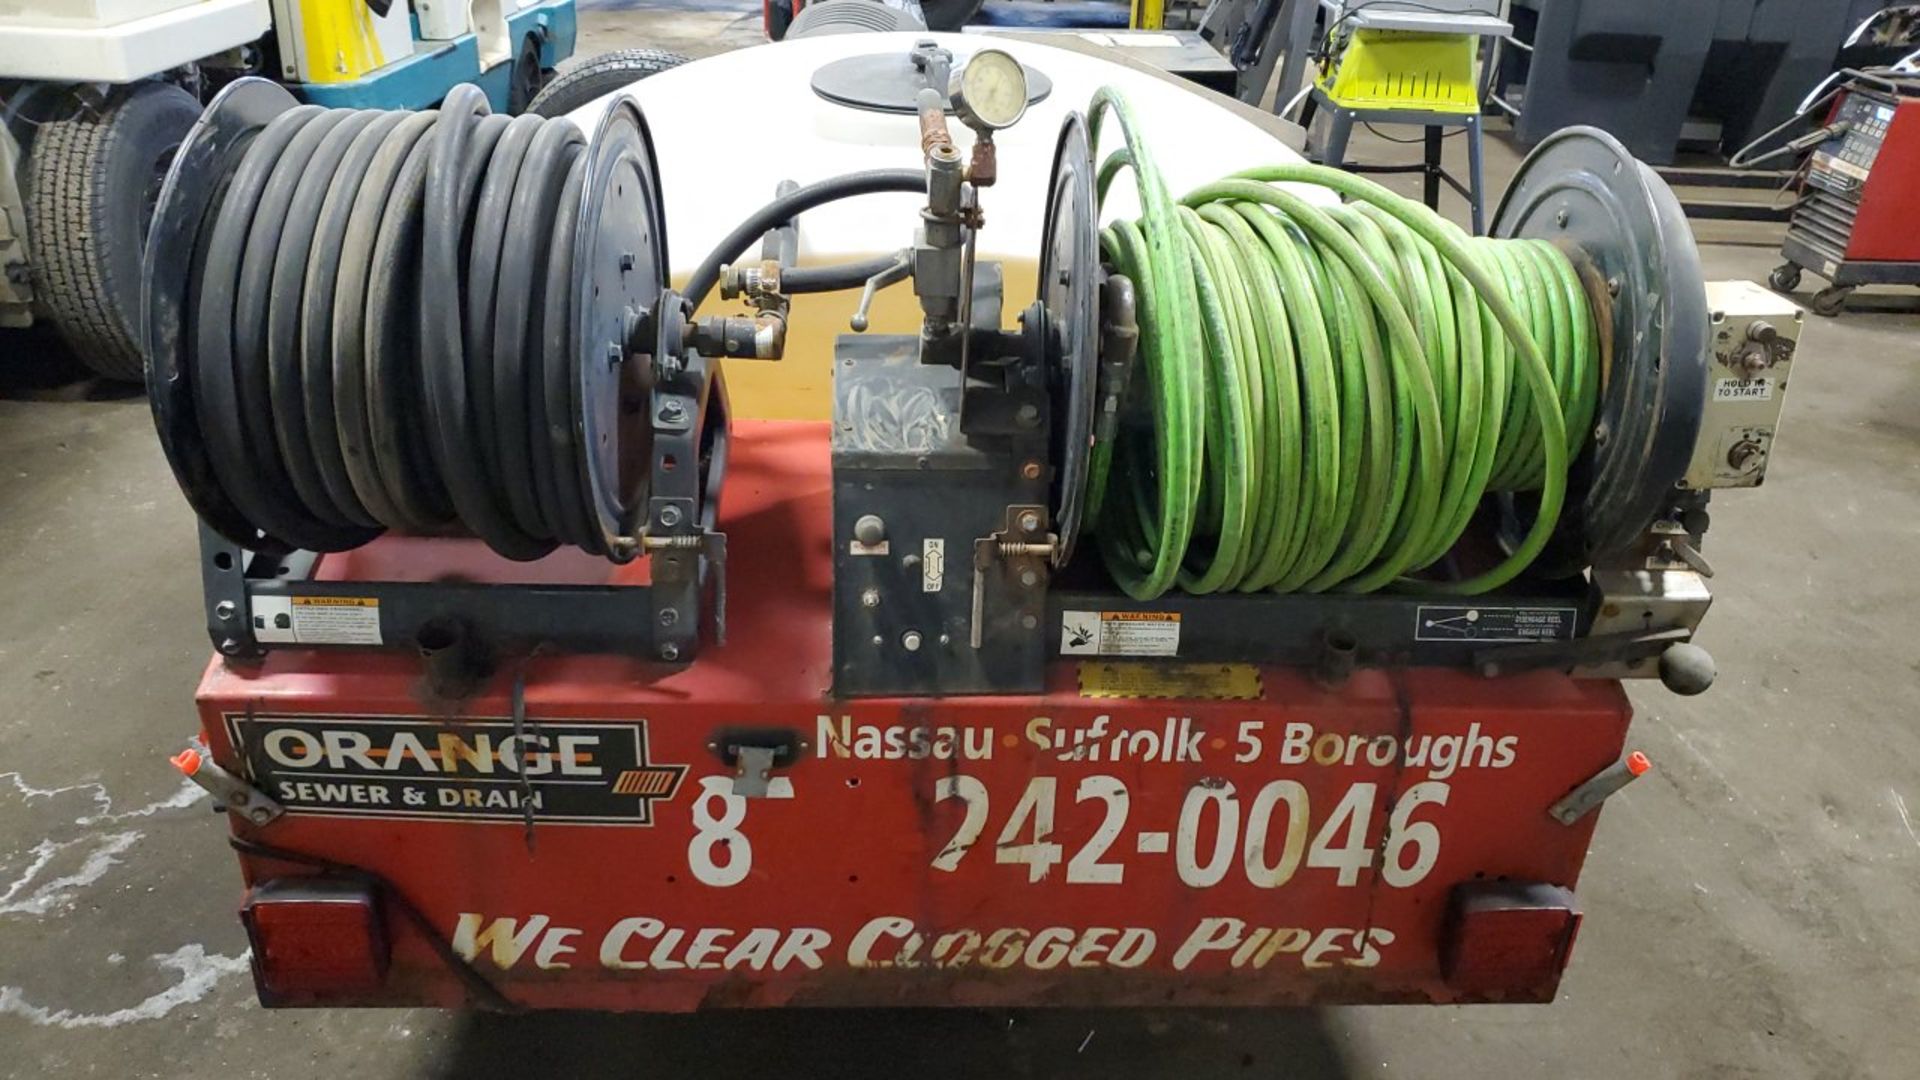 Sewer Jetter Trailer - Image 4 of 5